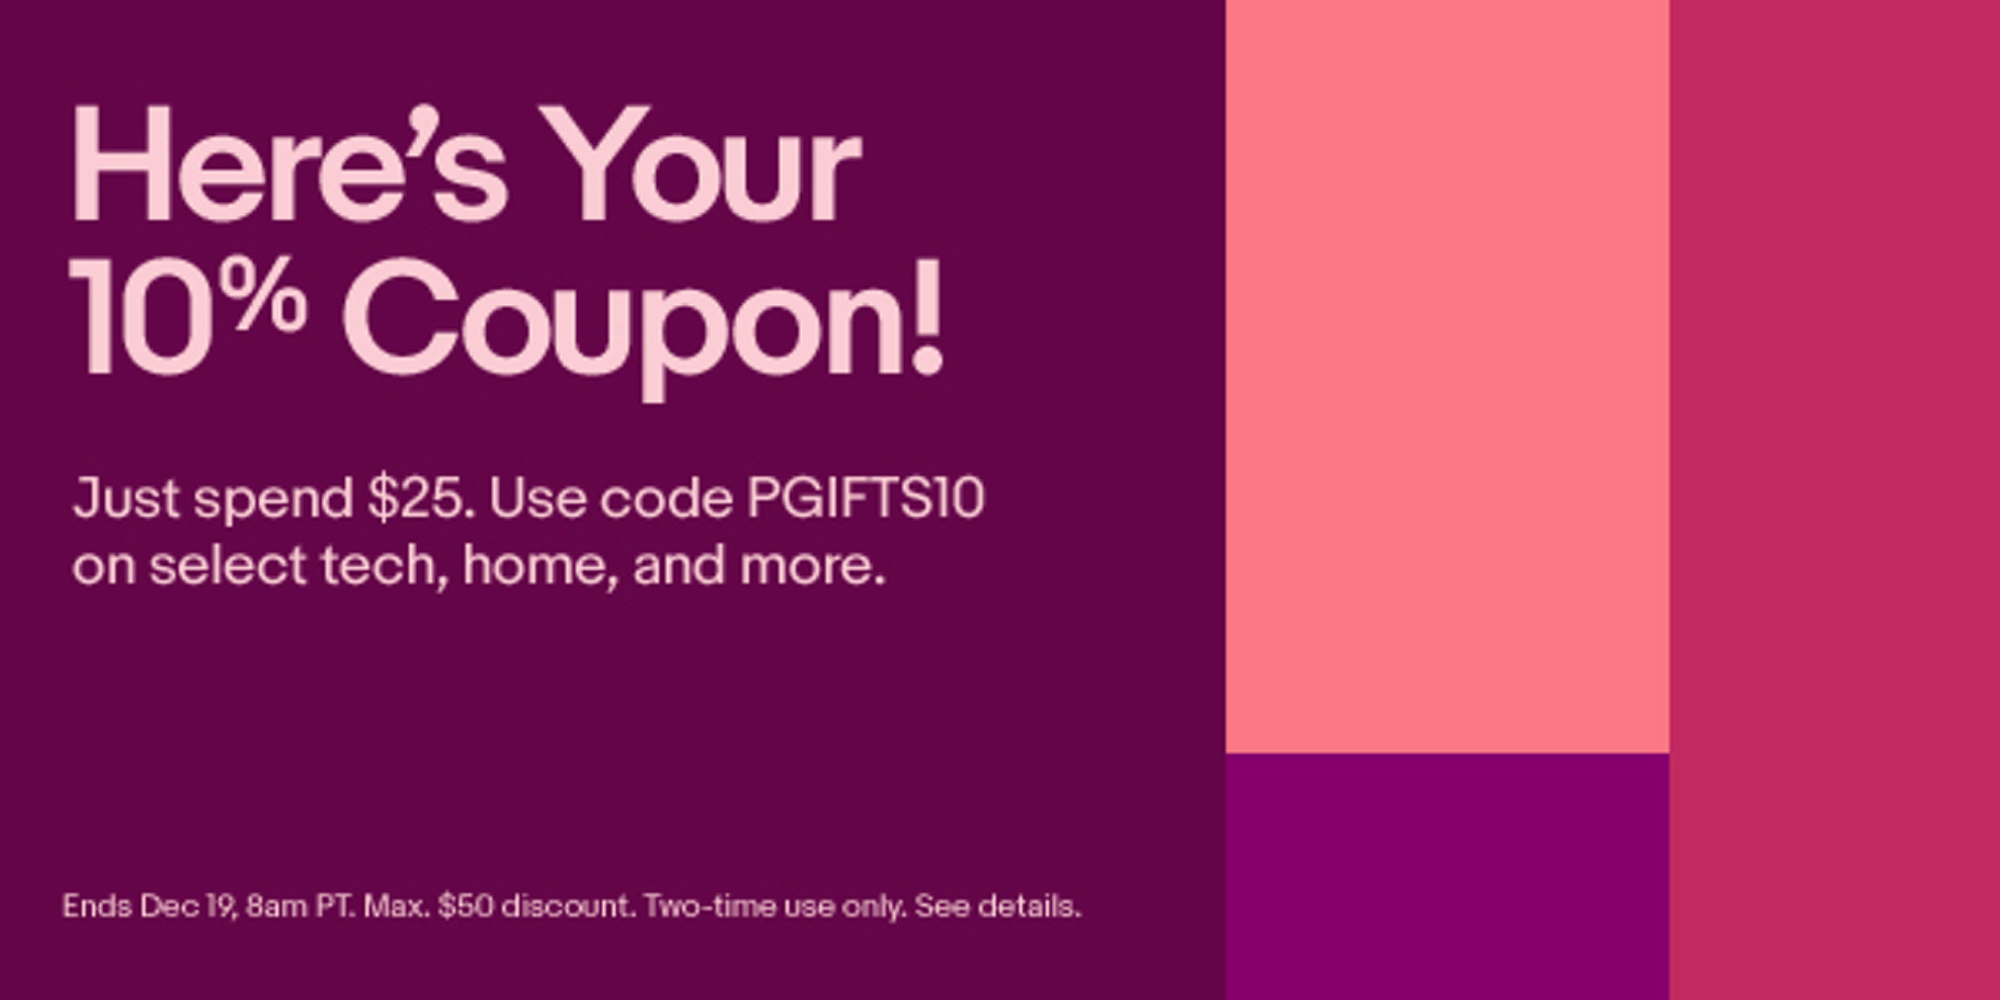 eBay's back with a new promo code good for 10 off orders of 25 or more